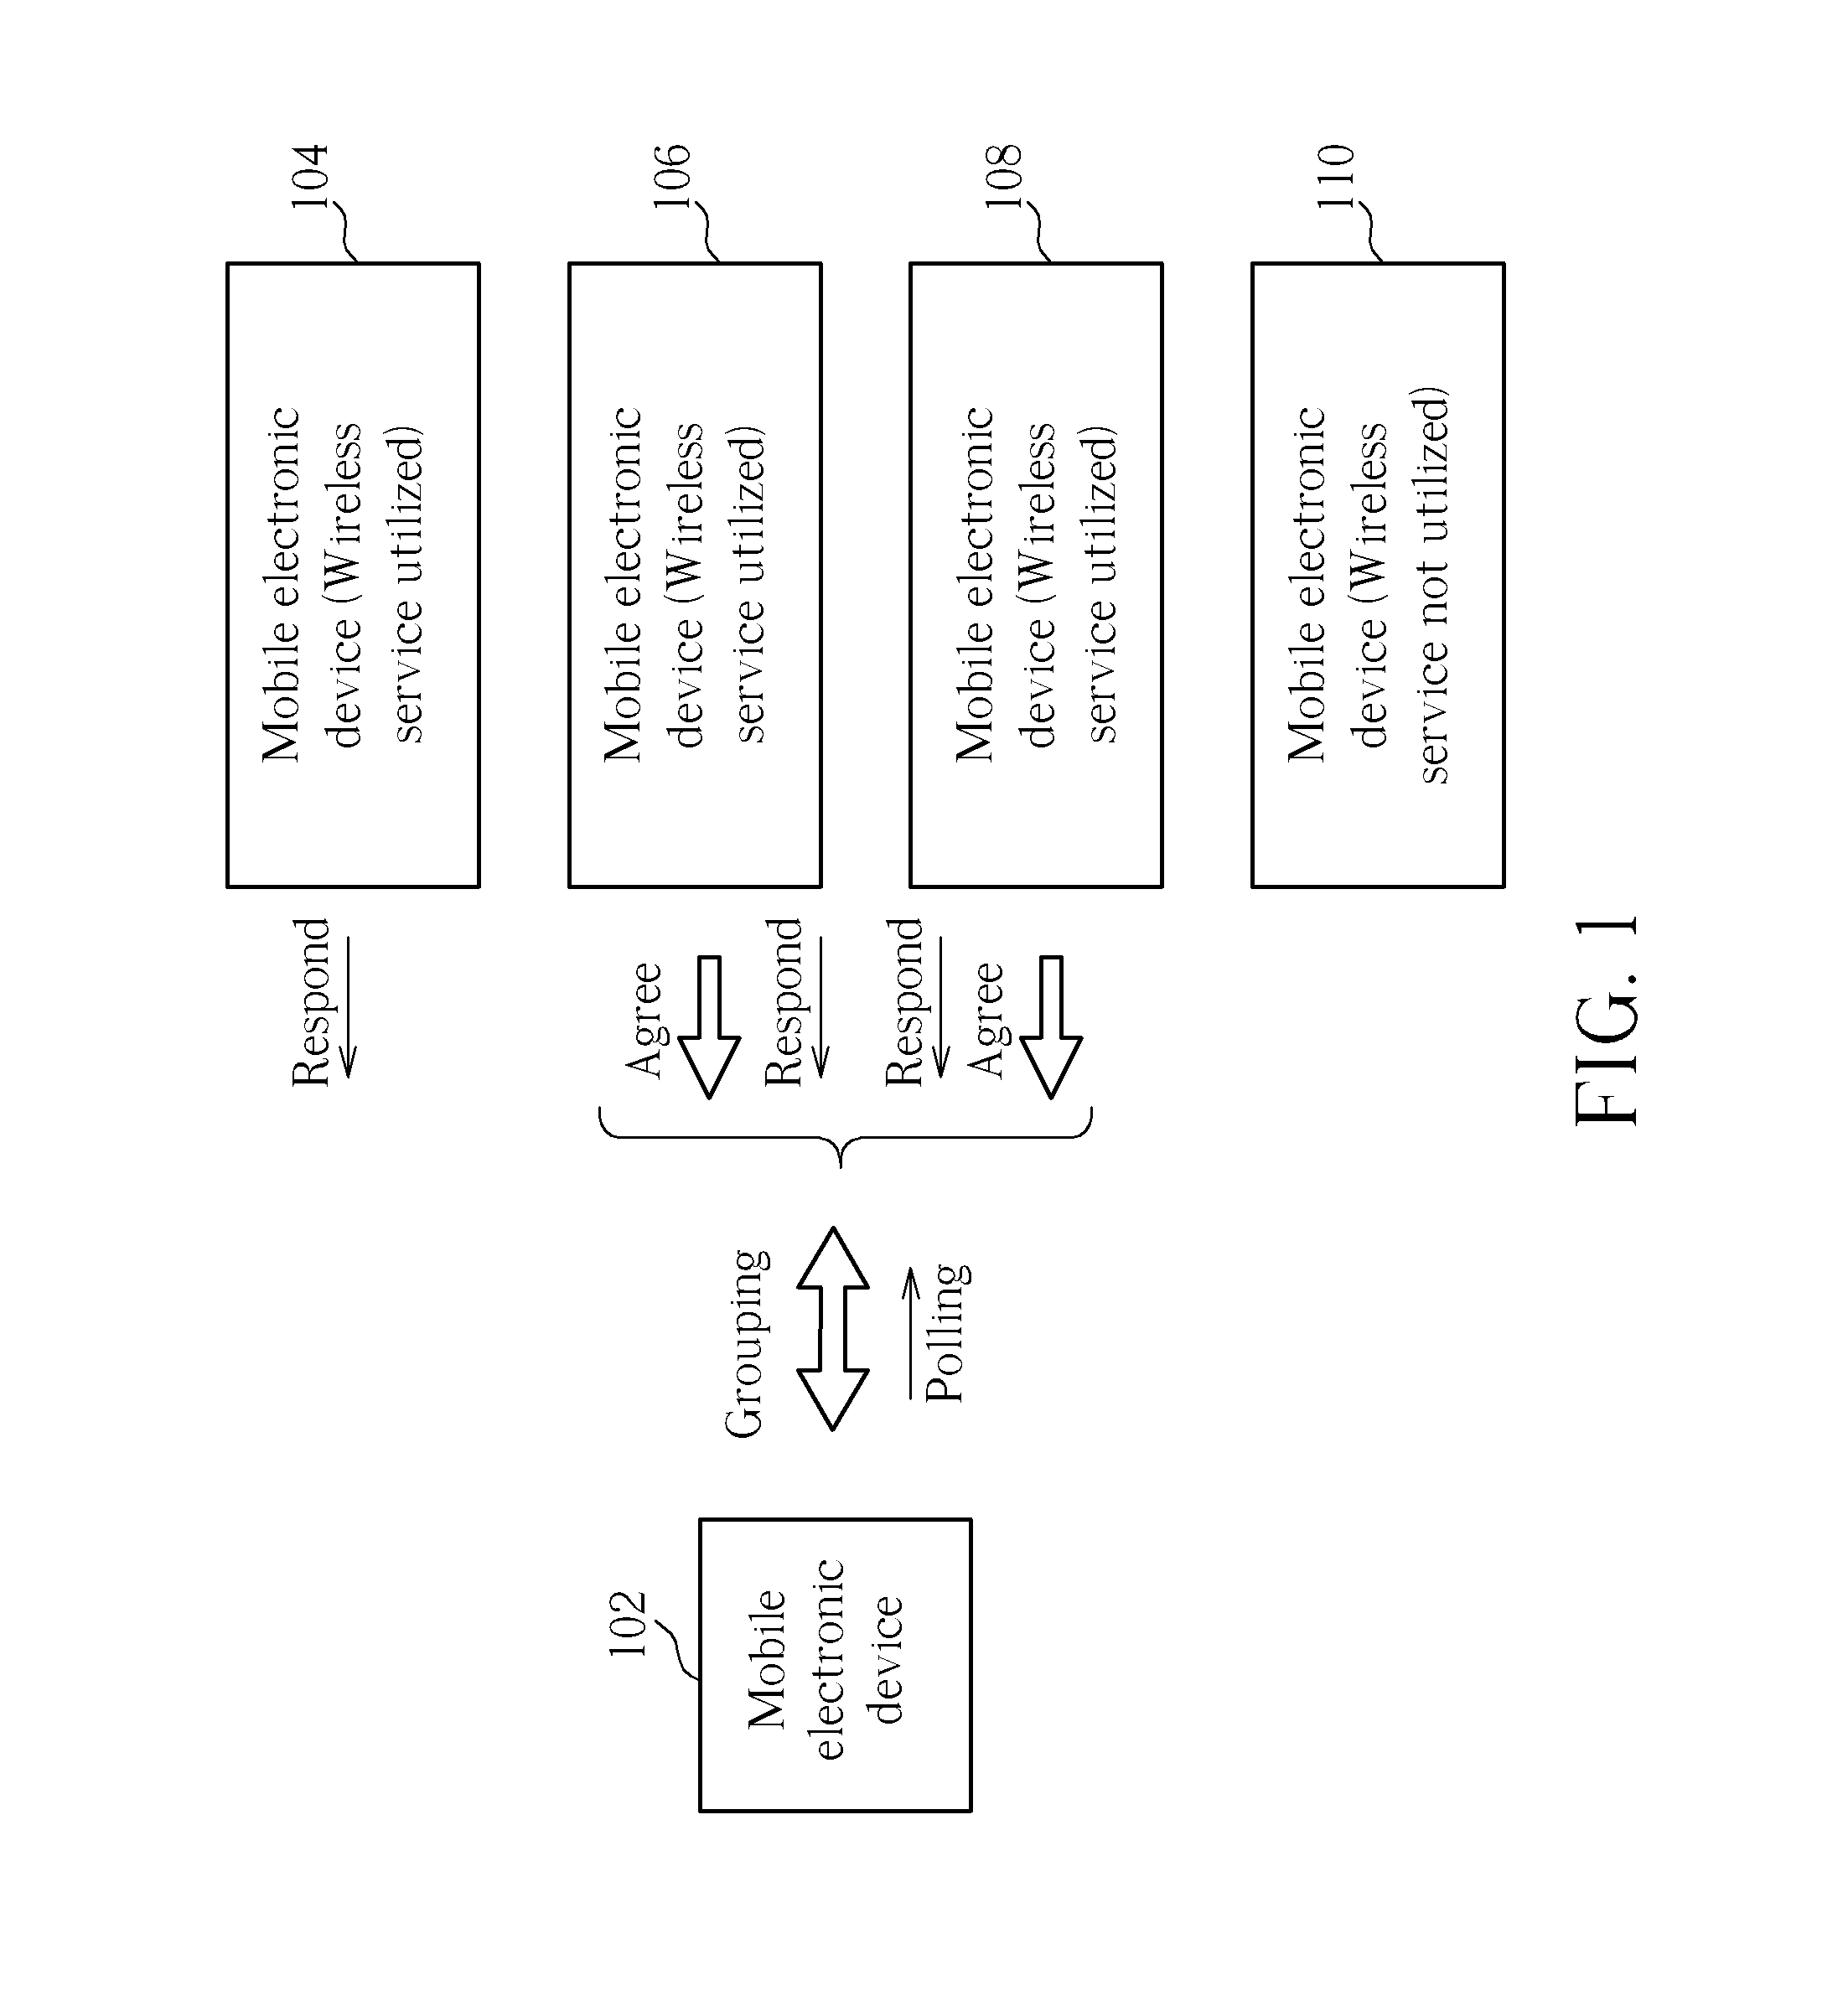 Grouping Method for Group-buying Based on Wireless Communication Protocol